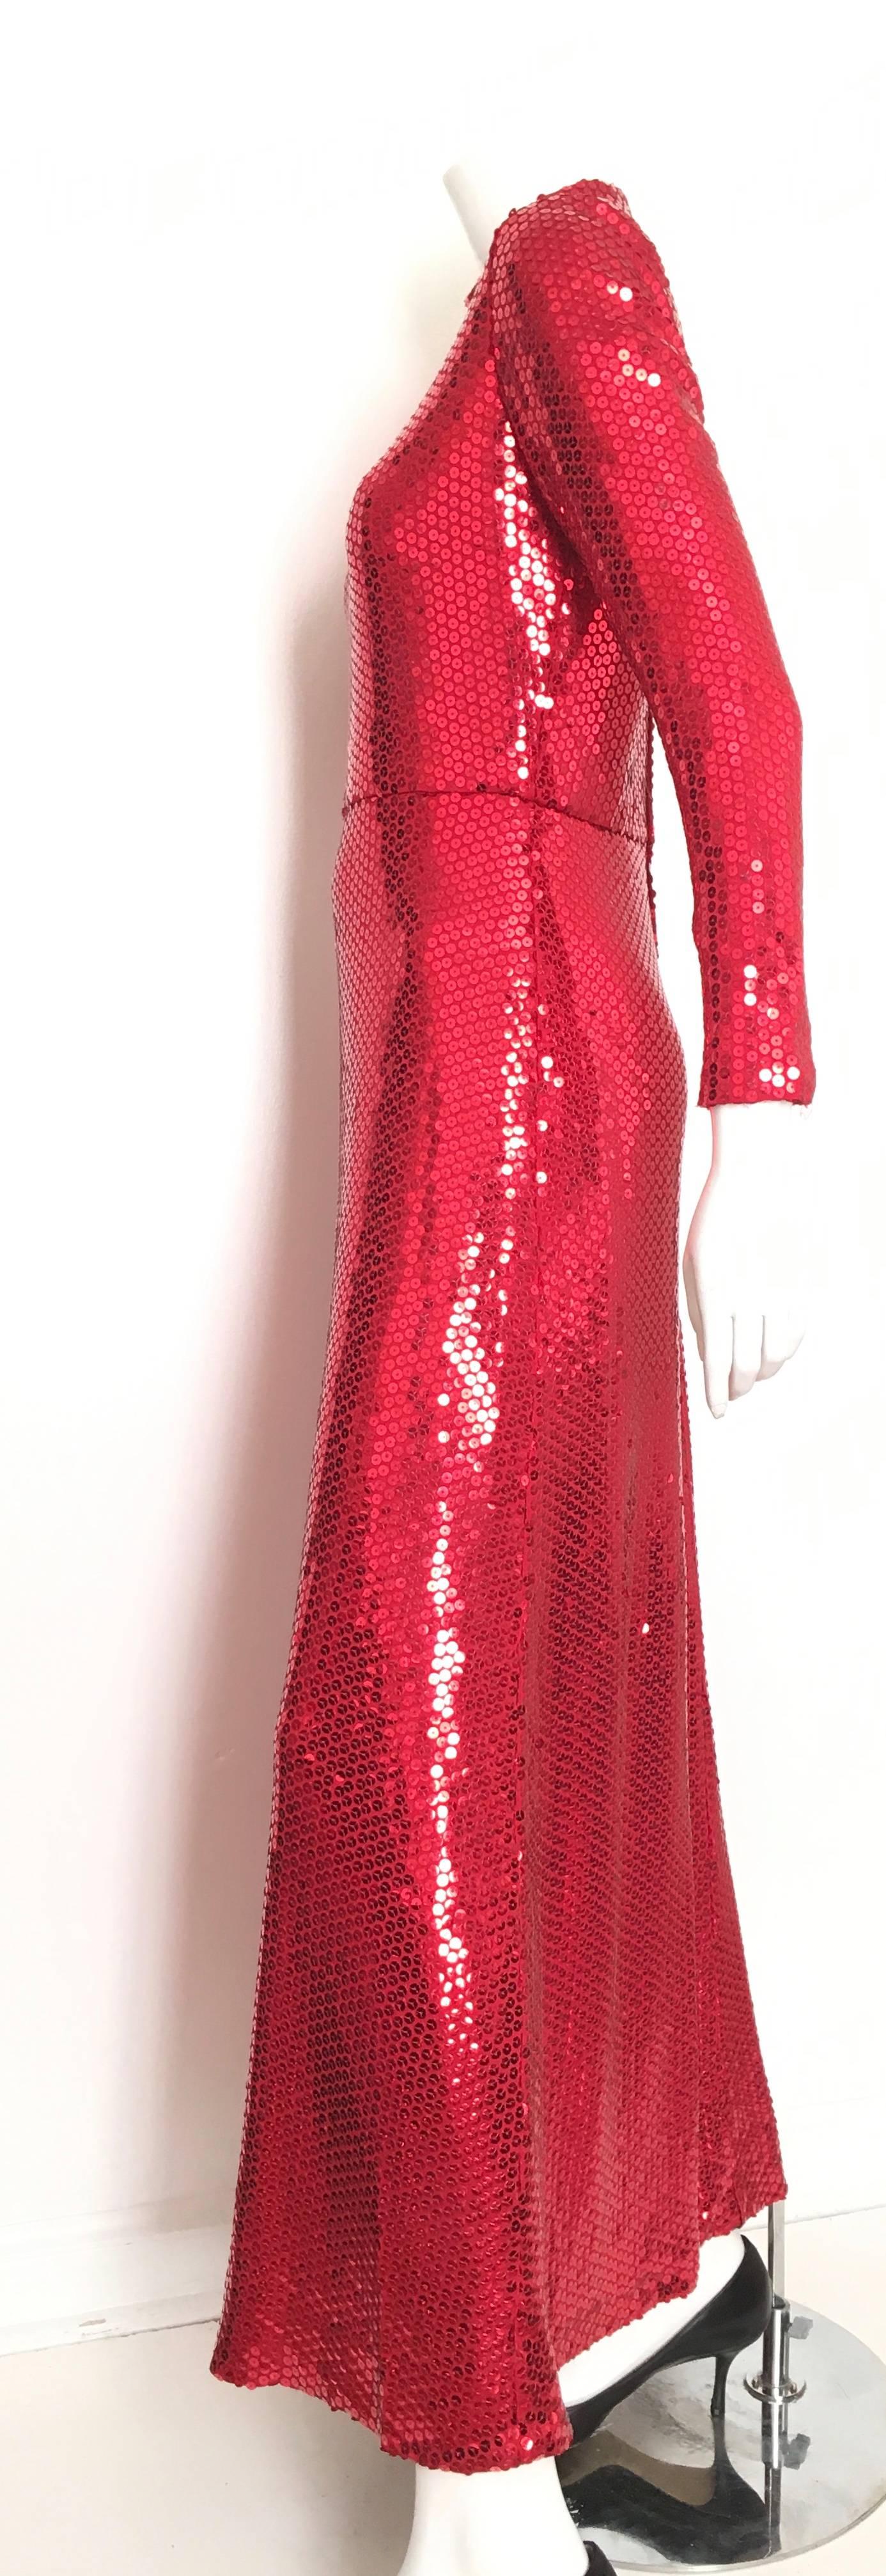 Neiman Marcus 80s Red Sequin Gown Size 6. 1